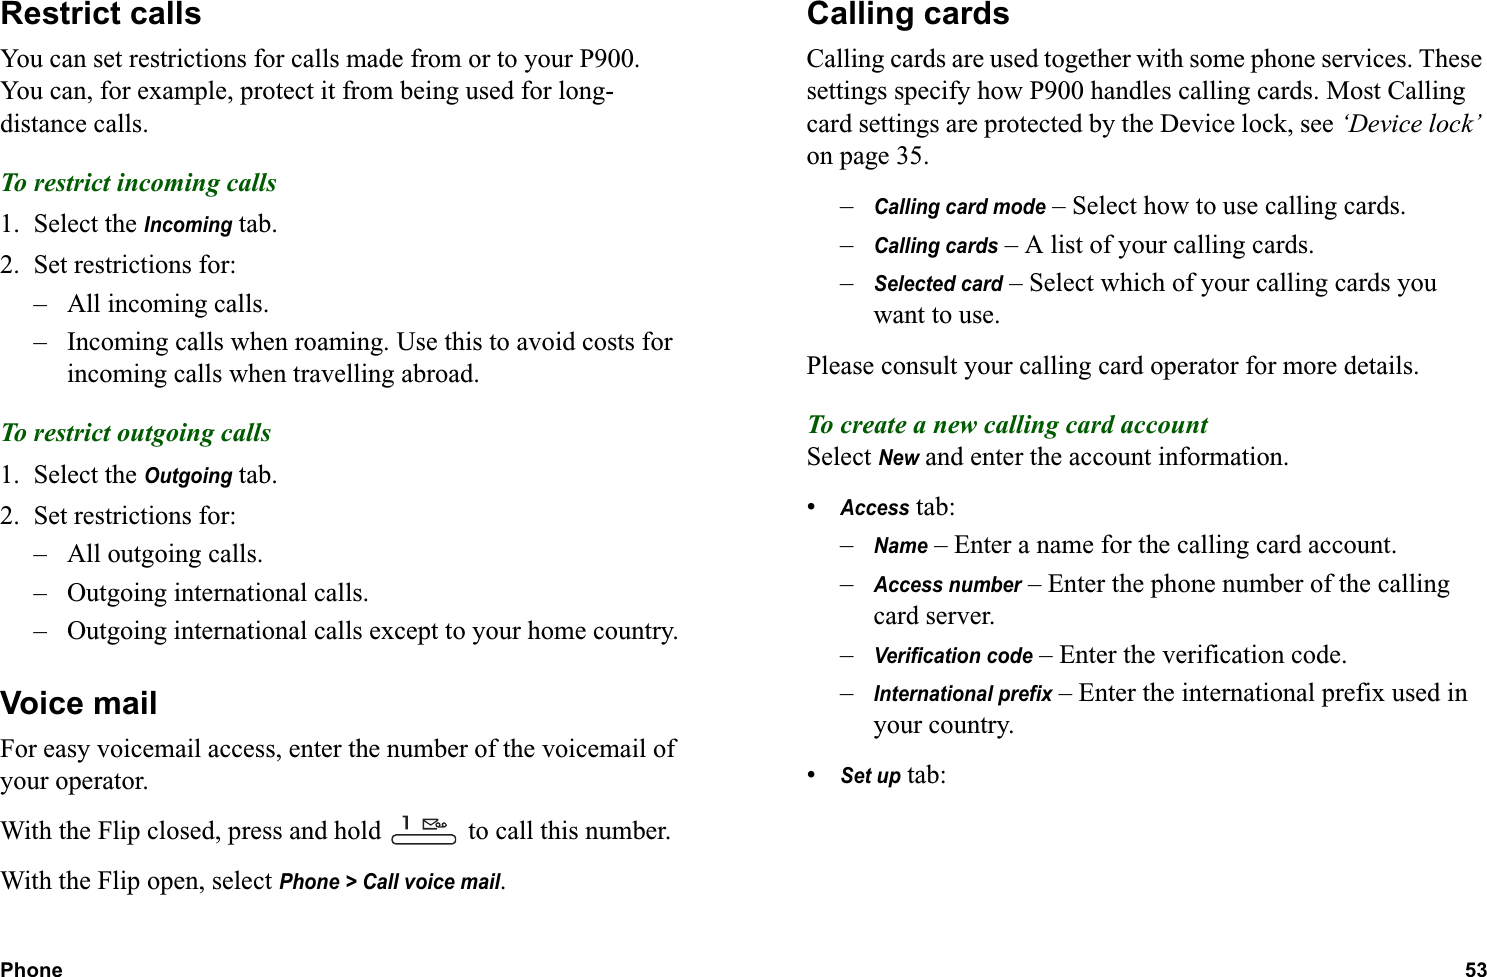 Phone 53  Restrict callsYou can set restrictions for calls made from or to your P900. You can, for example, protect it from being used for long-distance calls.To restrict incoming calls1. Select the Incoming tab.2. Set restrictions for:– All incoming calls.– Incoming calls when roaming. Use this to avoid costs for incoming calls when travelling abroad.To restrict outgoing calls1. Select the Outgoing tab.2. Set restrictions for:– All outgoing calls.– Outgoing international calls.– Outgoing international calls except to your home country.Voice mailFor easy voicemail access, enter the number of the voicemail of your operator.With the Flip closed, press and hold   to call this number.With the Flip open, select Phone &gt; Call voice mail.Calling cardsCalling cards are used together with some phone services. These settings specify how P900 handles calling cards. Most Calling card settings are protected by the Device lock, see ‘Device lock’ on page 35.–Calling card mode – Select how to use calling cards.–Calling cards – A list of your calling cards.–Selected card – Select which of your calling cards you want to use.Please consult your calling card operator for more details.To create a new calling card accountSelect New and enter the account information.•Access tab:–Name – Enter a name for the calling card account.–Access number – Enter the phone number of the calling card server.–Verification code – Enter the verification code. –International prefix – Enter the international prefix used in your country.•Set up tab: